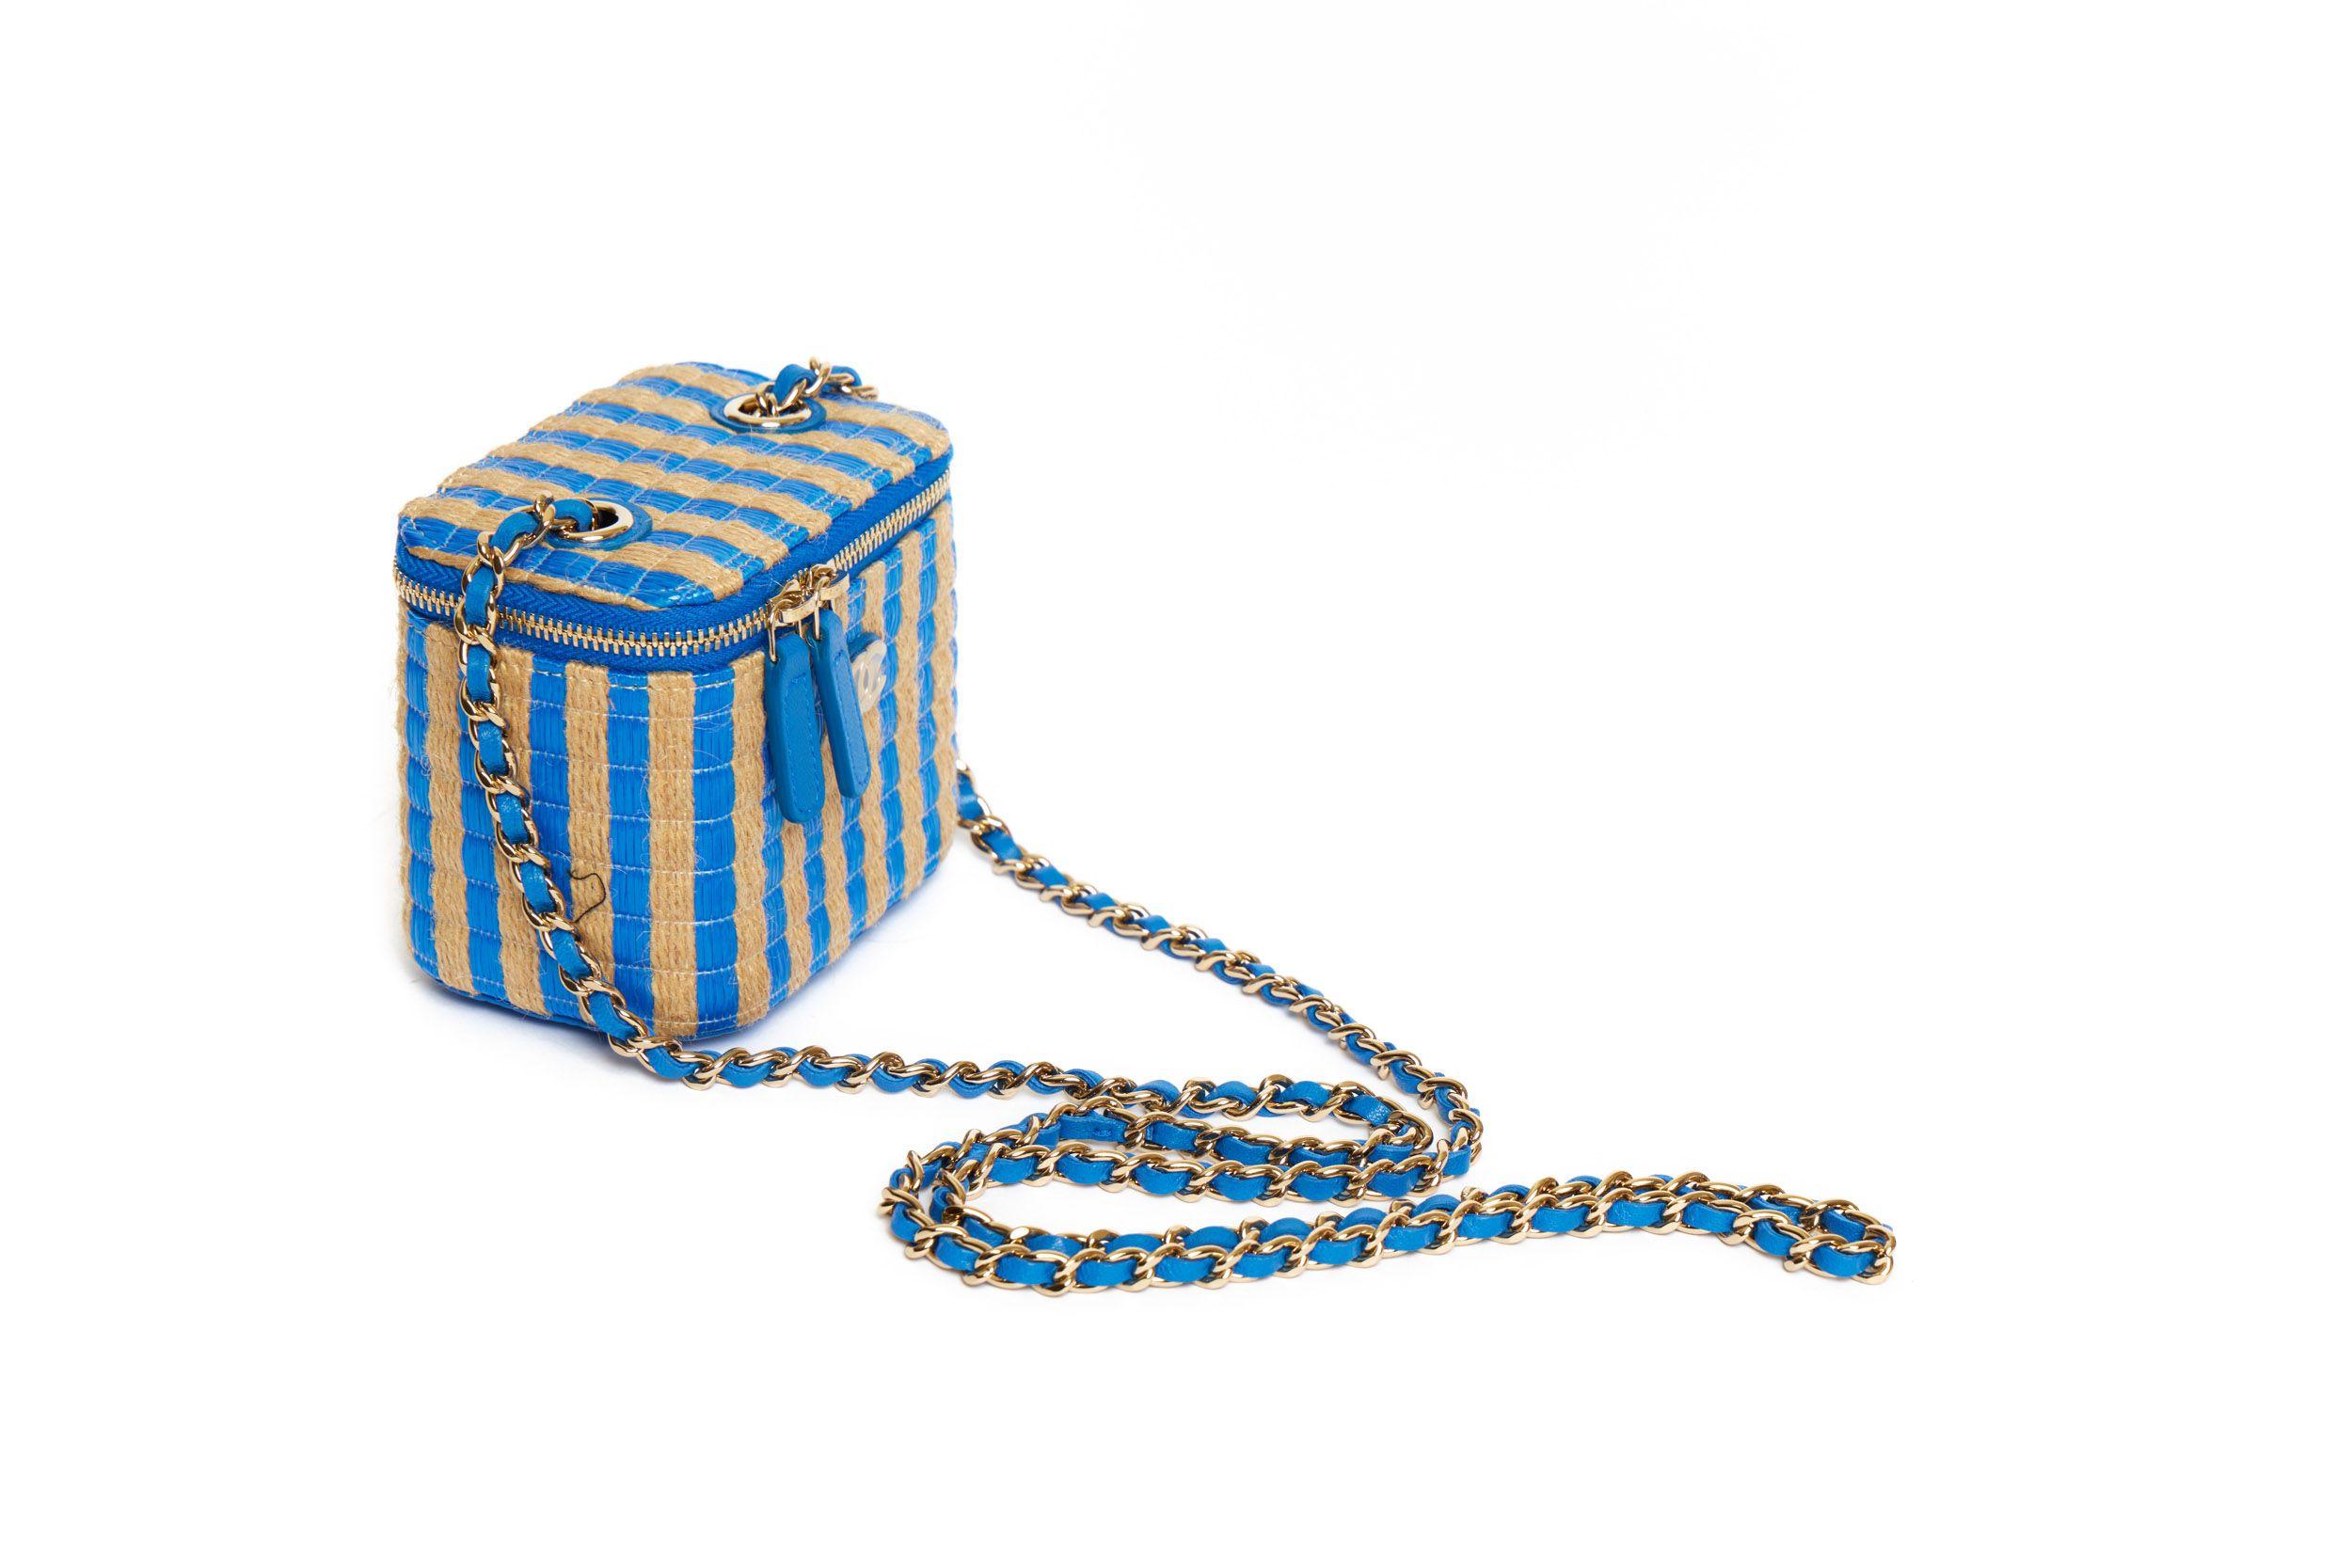 Mini Chanel Raffia Vanity bag with blue stripes from the 2020 collection. It’s a crossbody bag and the shoulder drop of the leather-threaded gold chain is 22’. On front of the bag is a small CC logo which is still covered in plastic. The interior is